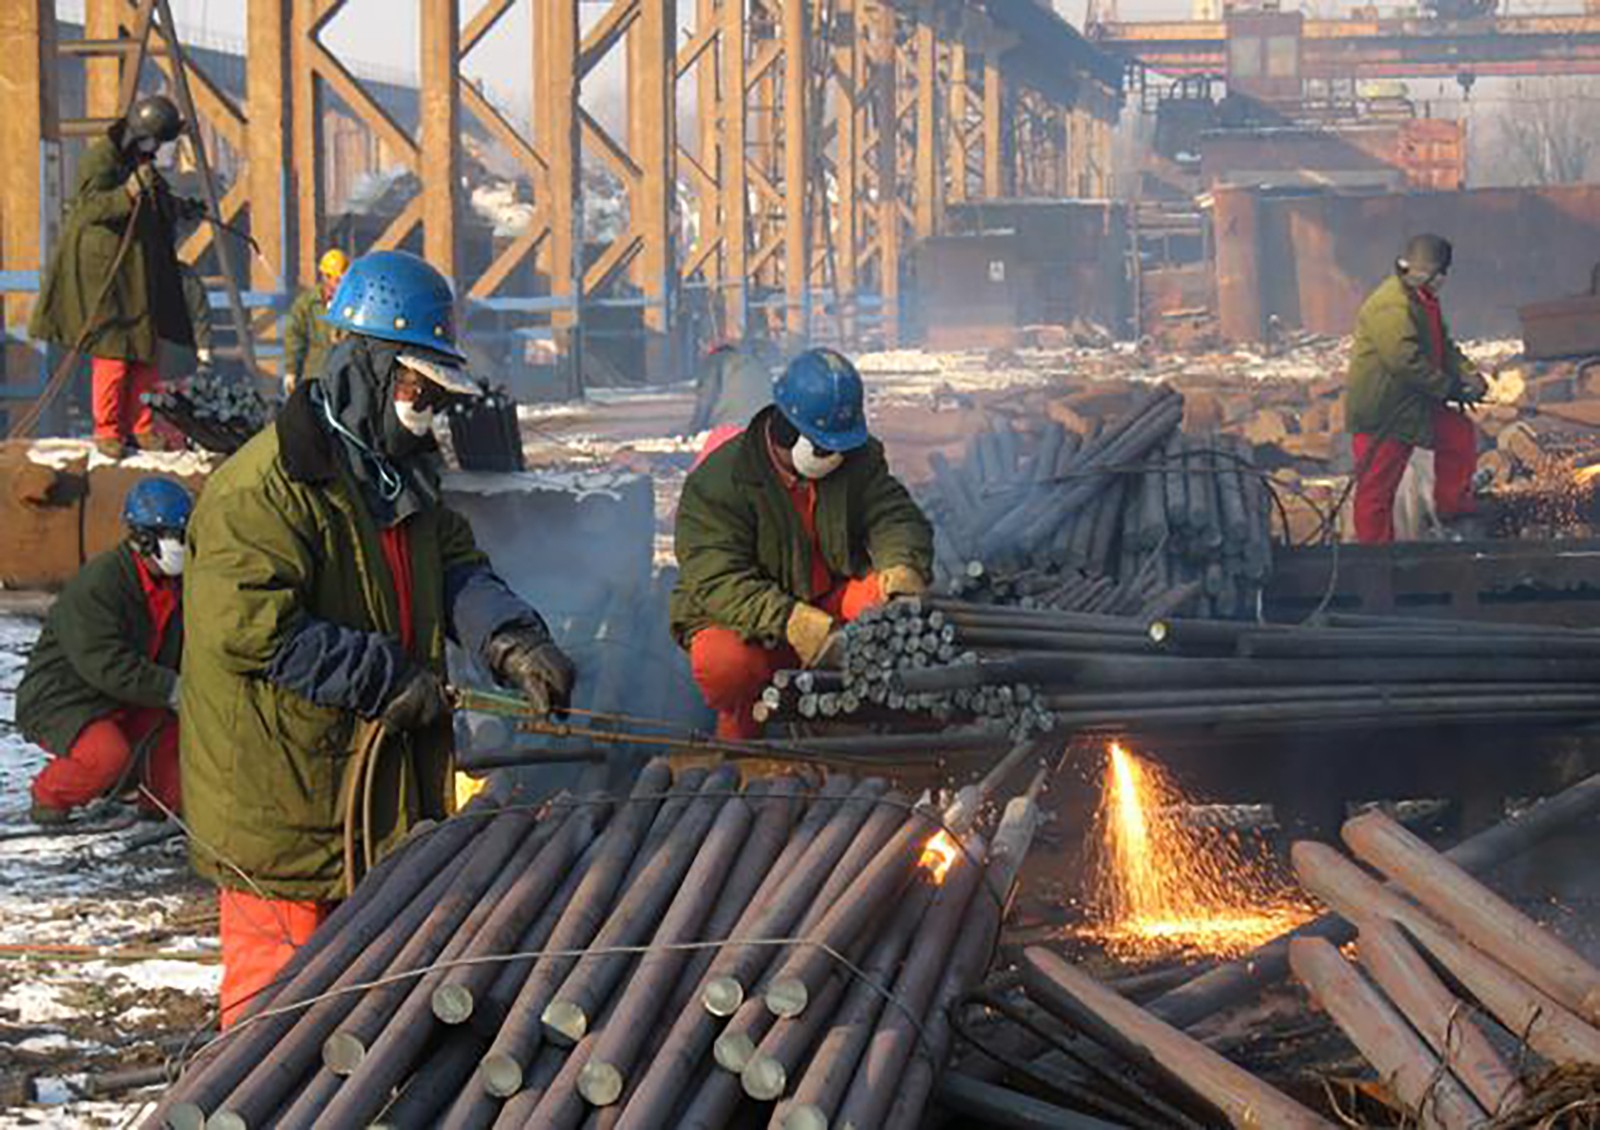 Fushun Special Steel inflated profit by US$276 million between 2010 and the first three quarters of 2017. Photo: Fushun Special Steel